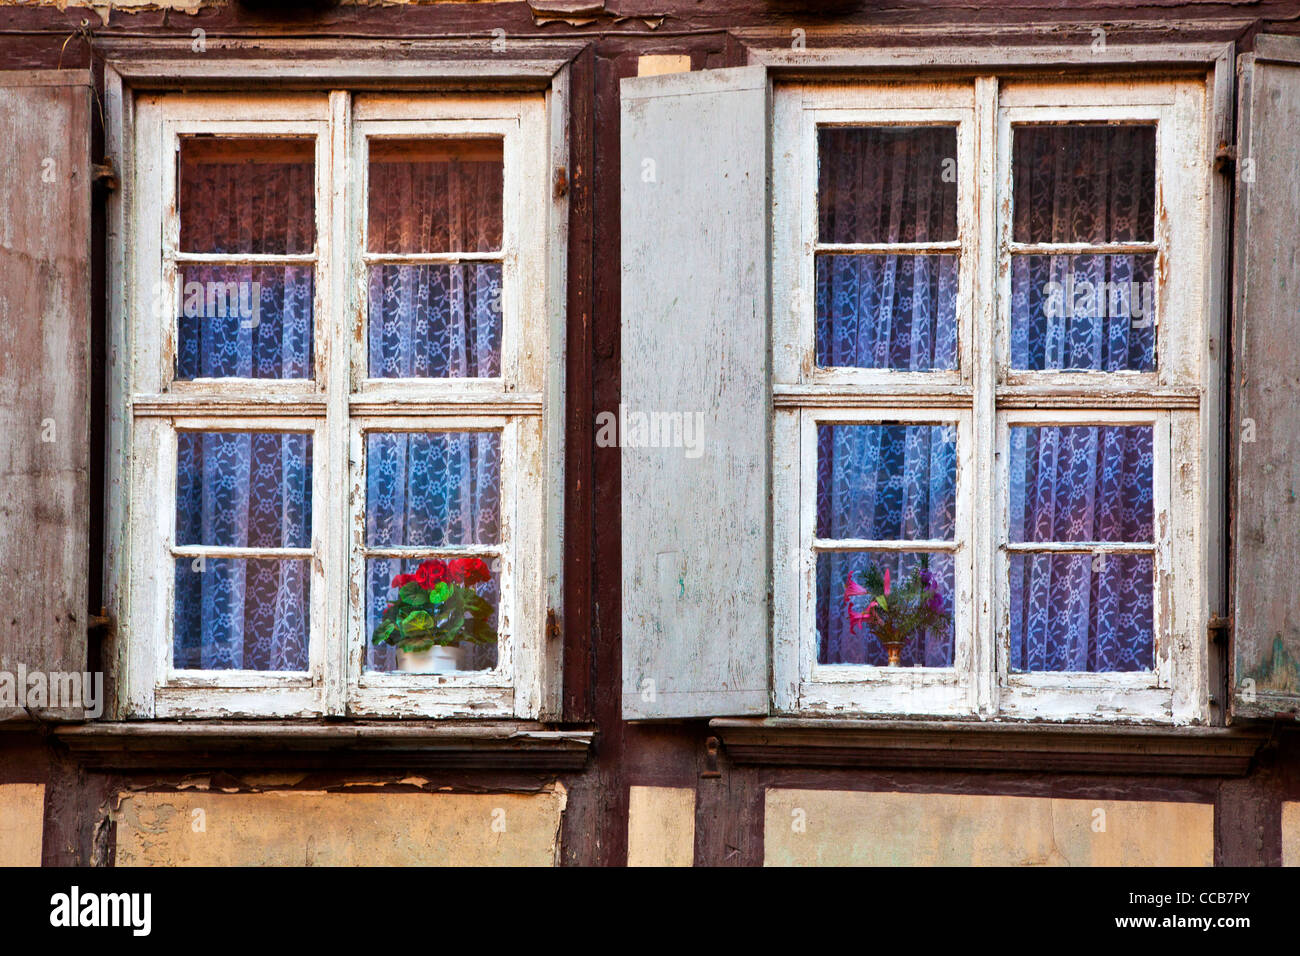 Two windows on a dilapidated house facade in the UNESCO German town of Quedlinburg in Saxony Anhalt, Germany Stock Photo